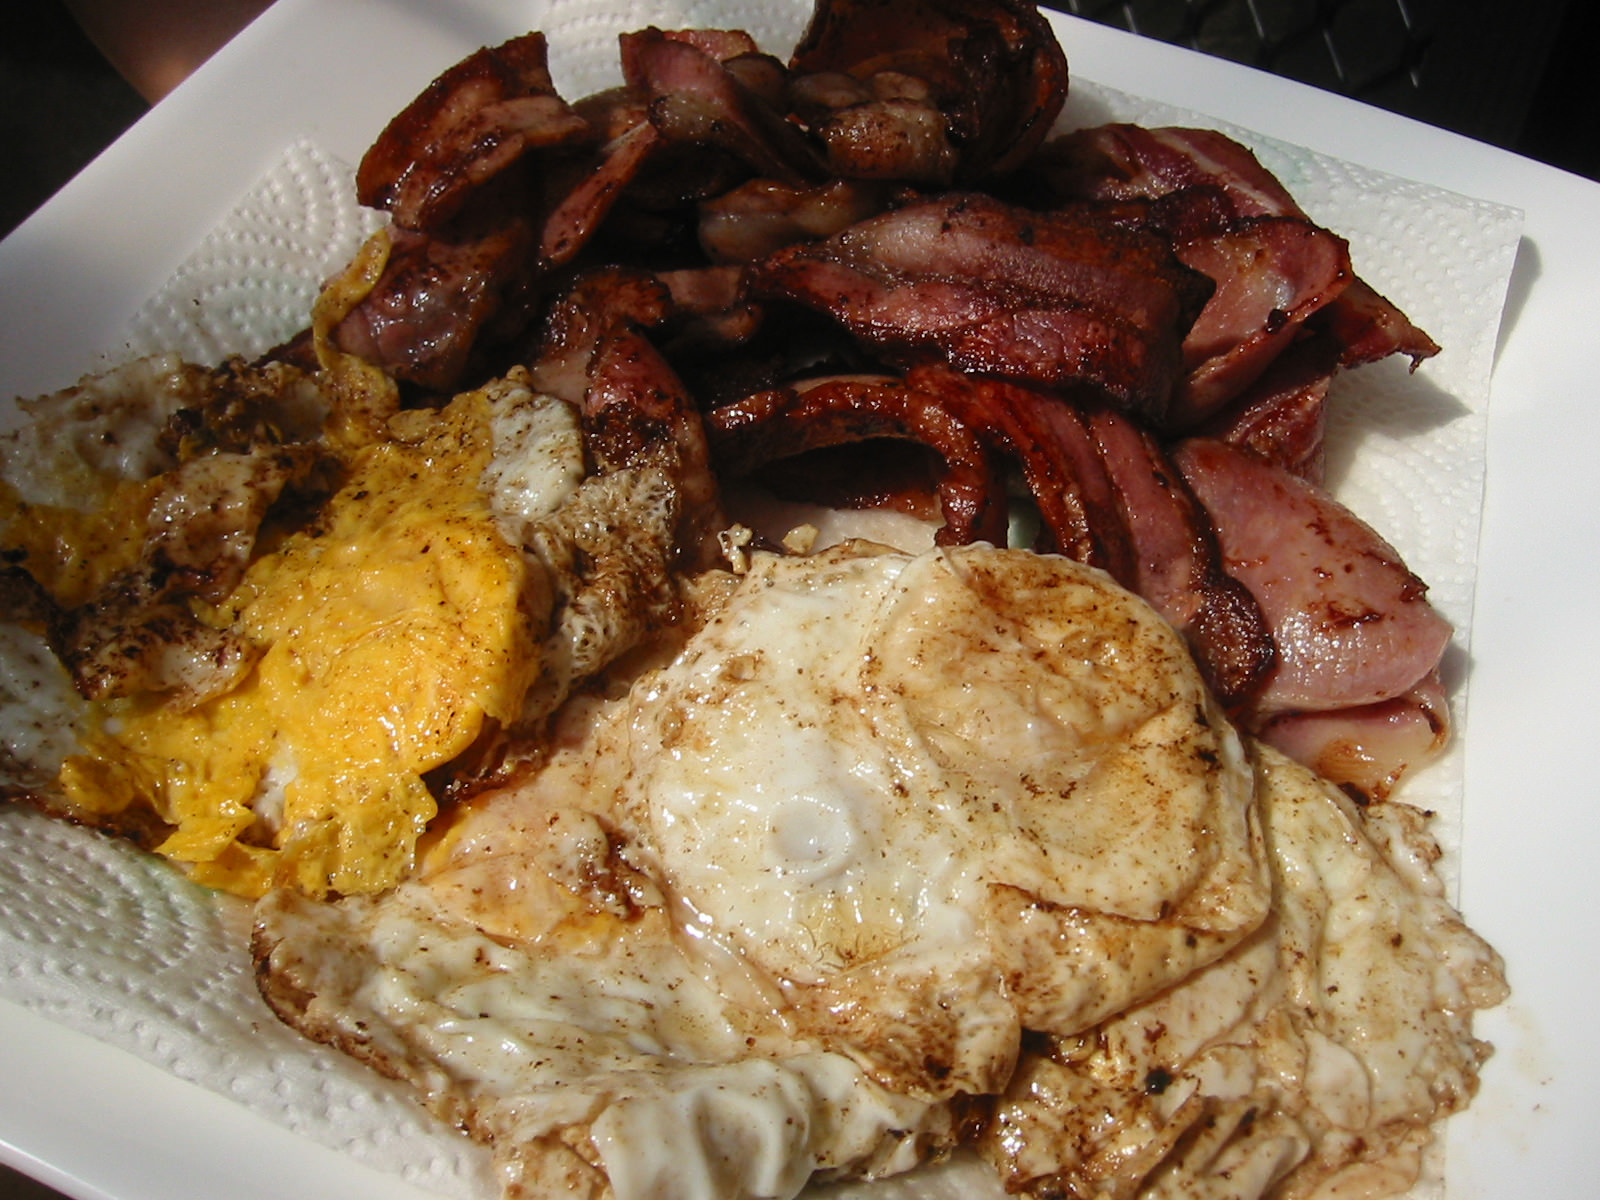 Platter of bacon and eggs